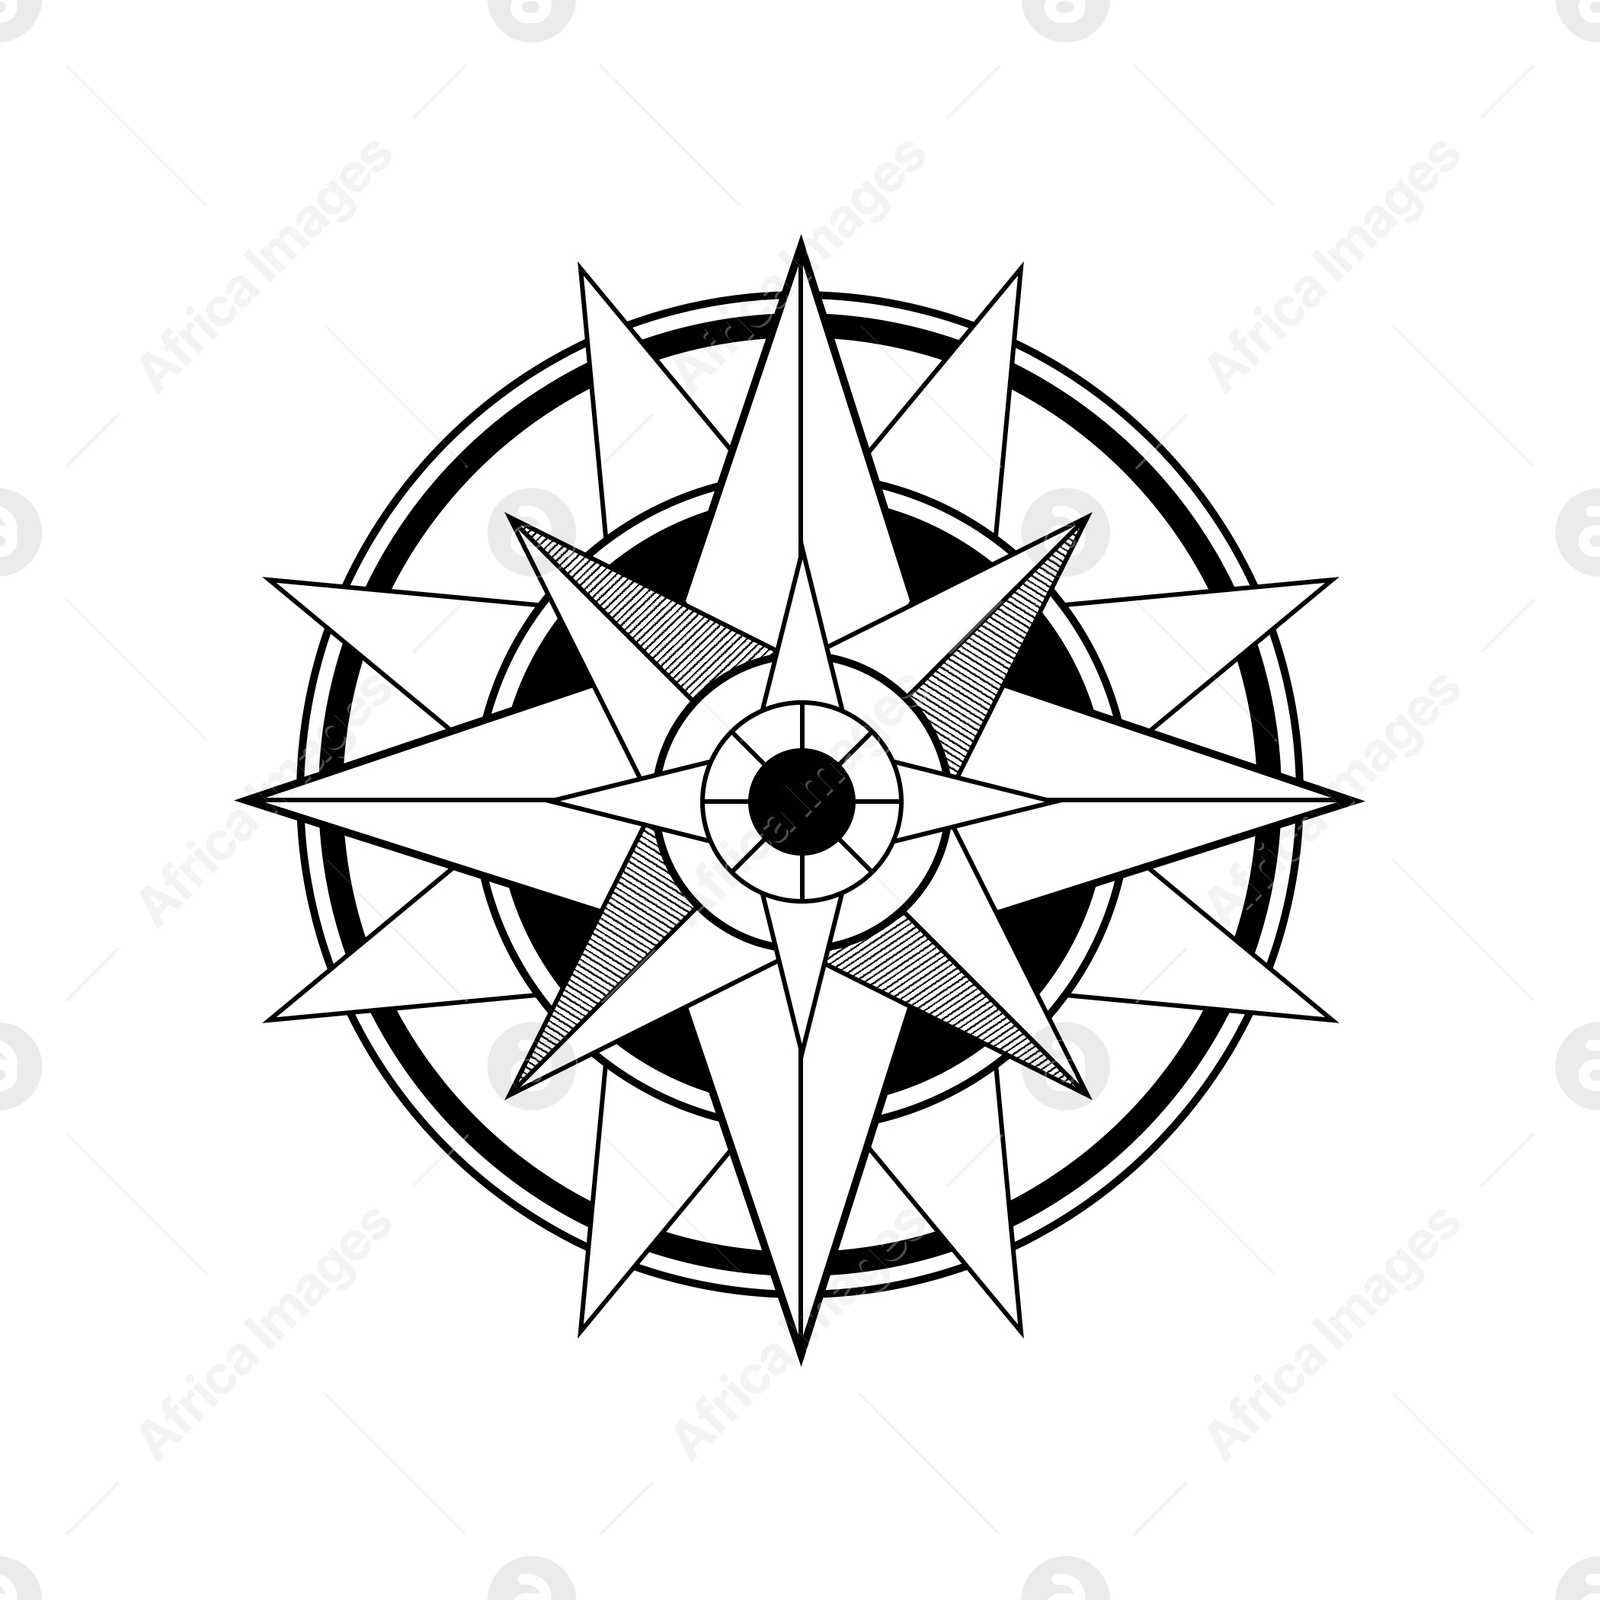 Illustration of  compass rose on white background